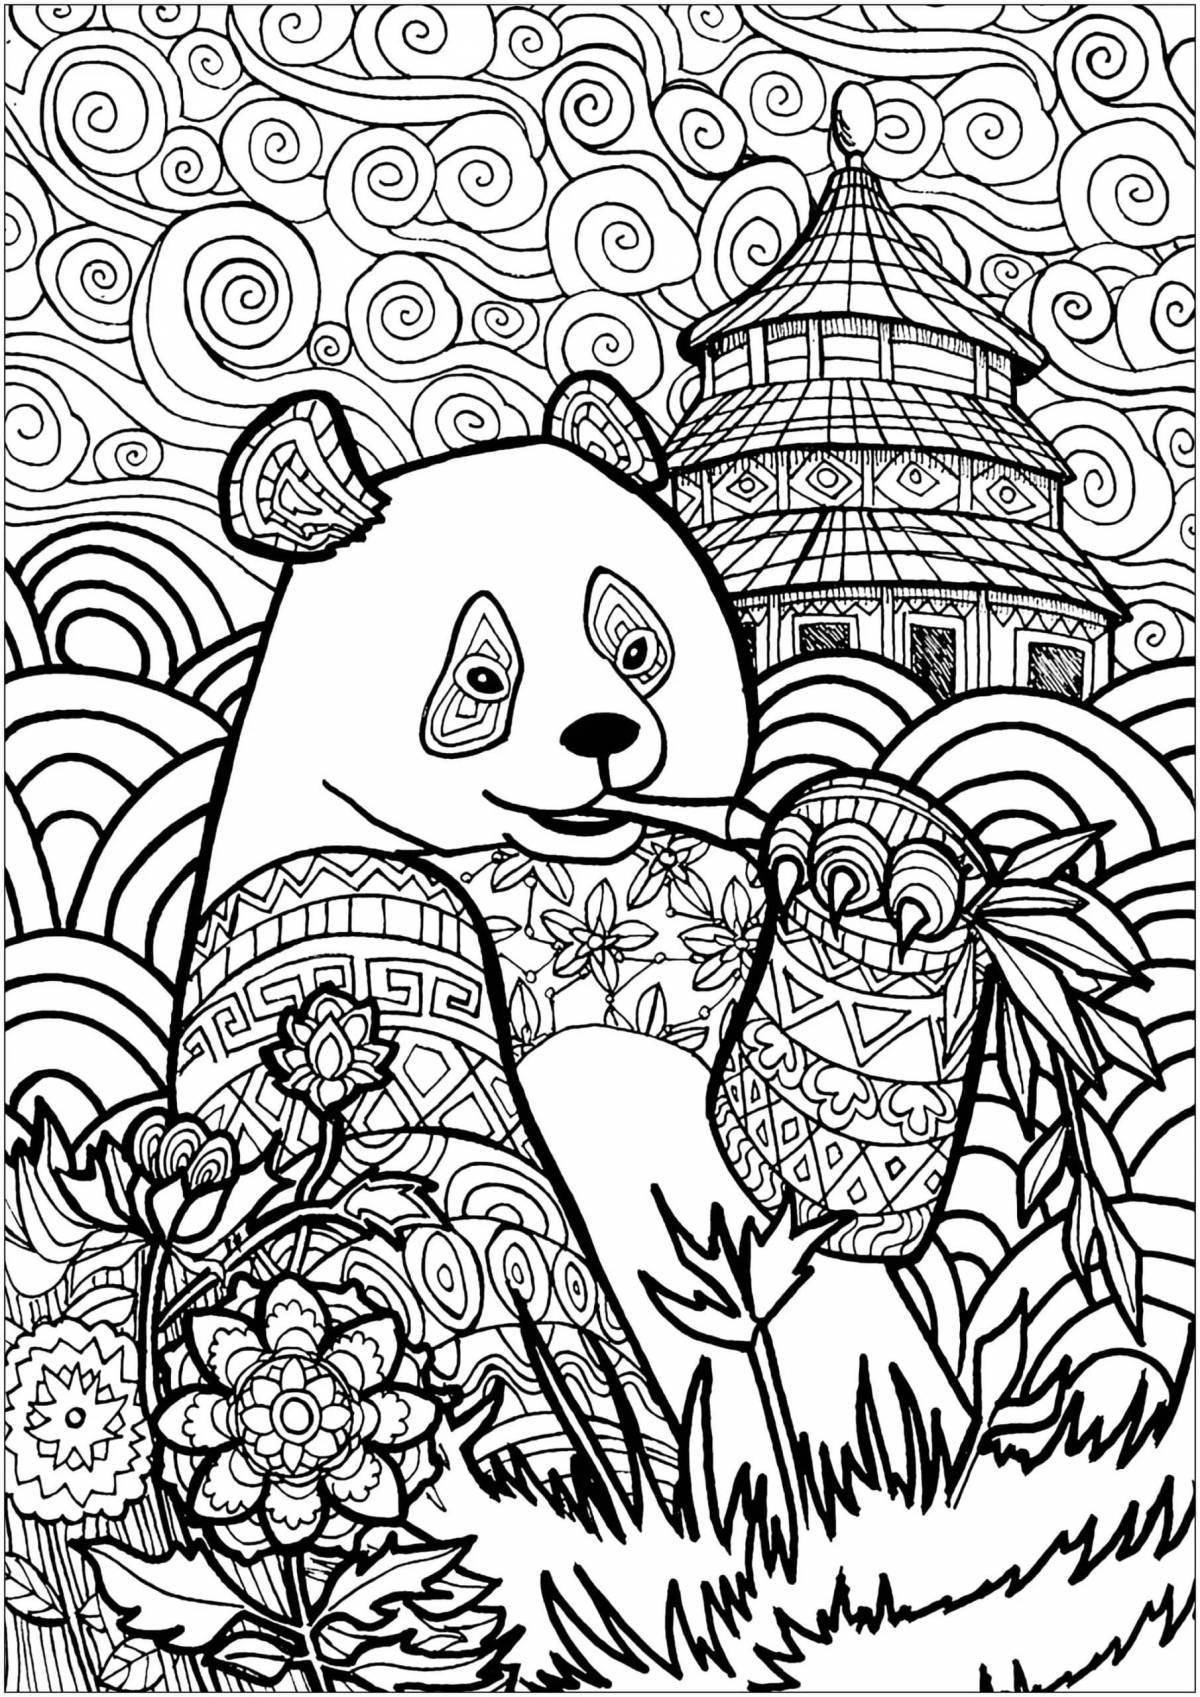 Stimulating coloring book best for adults